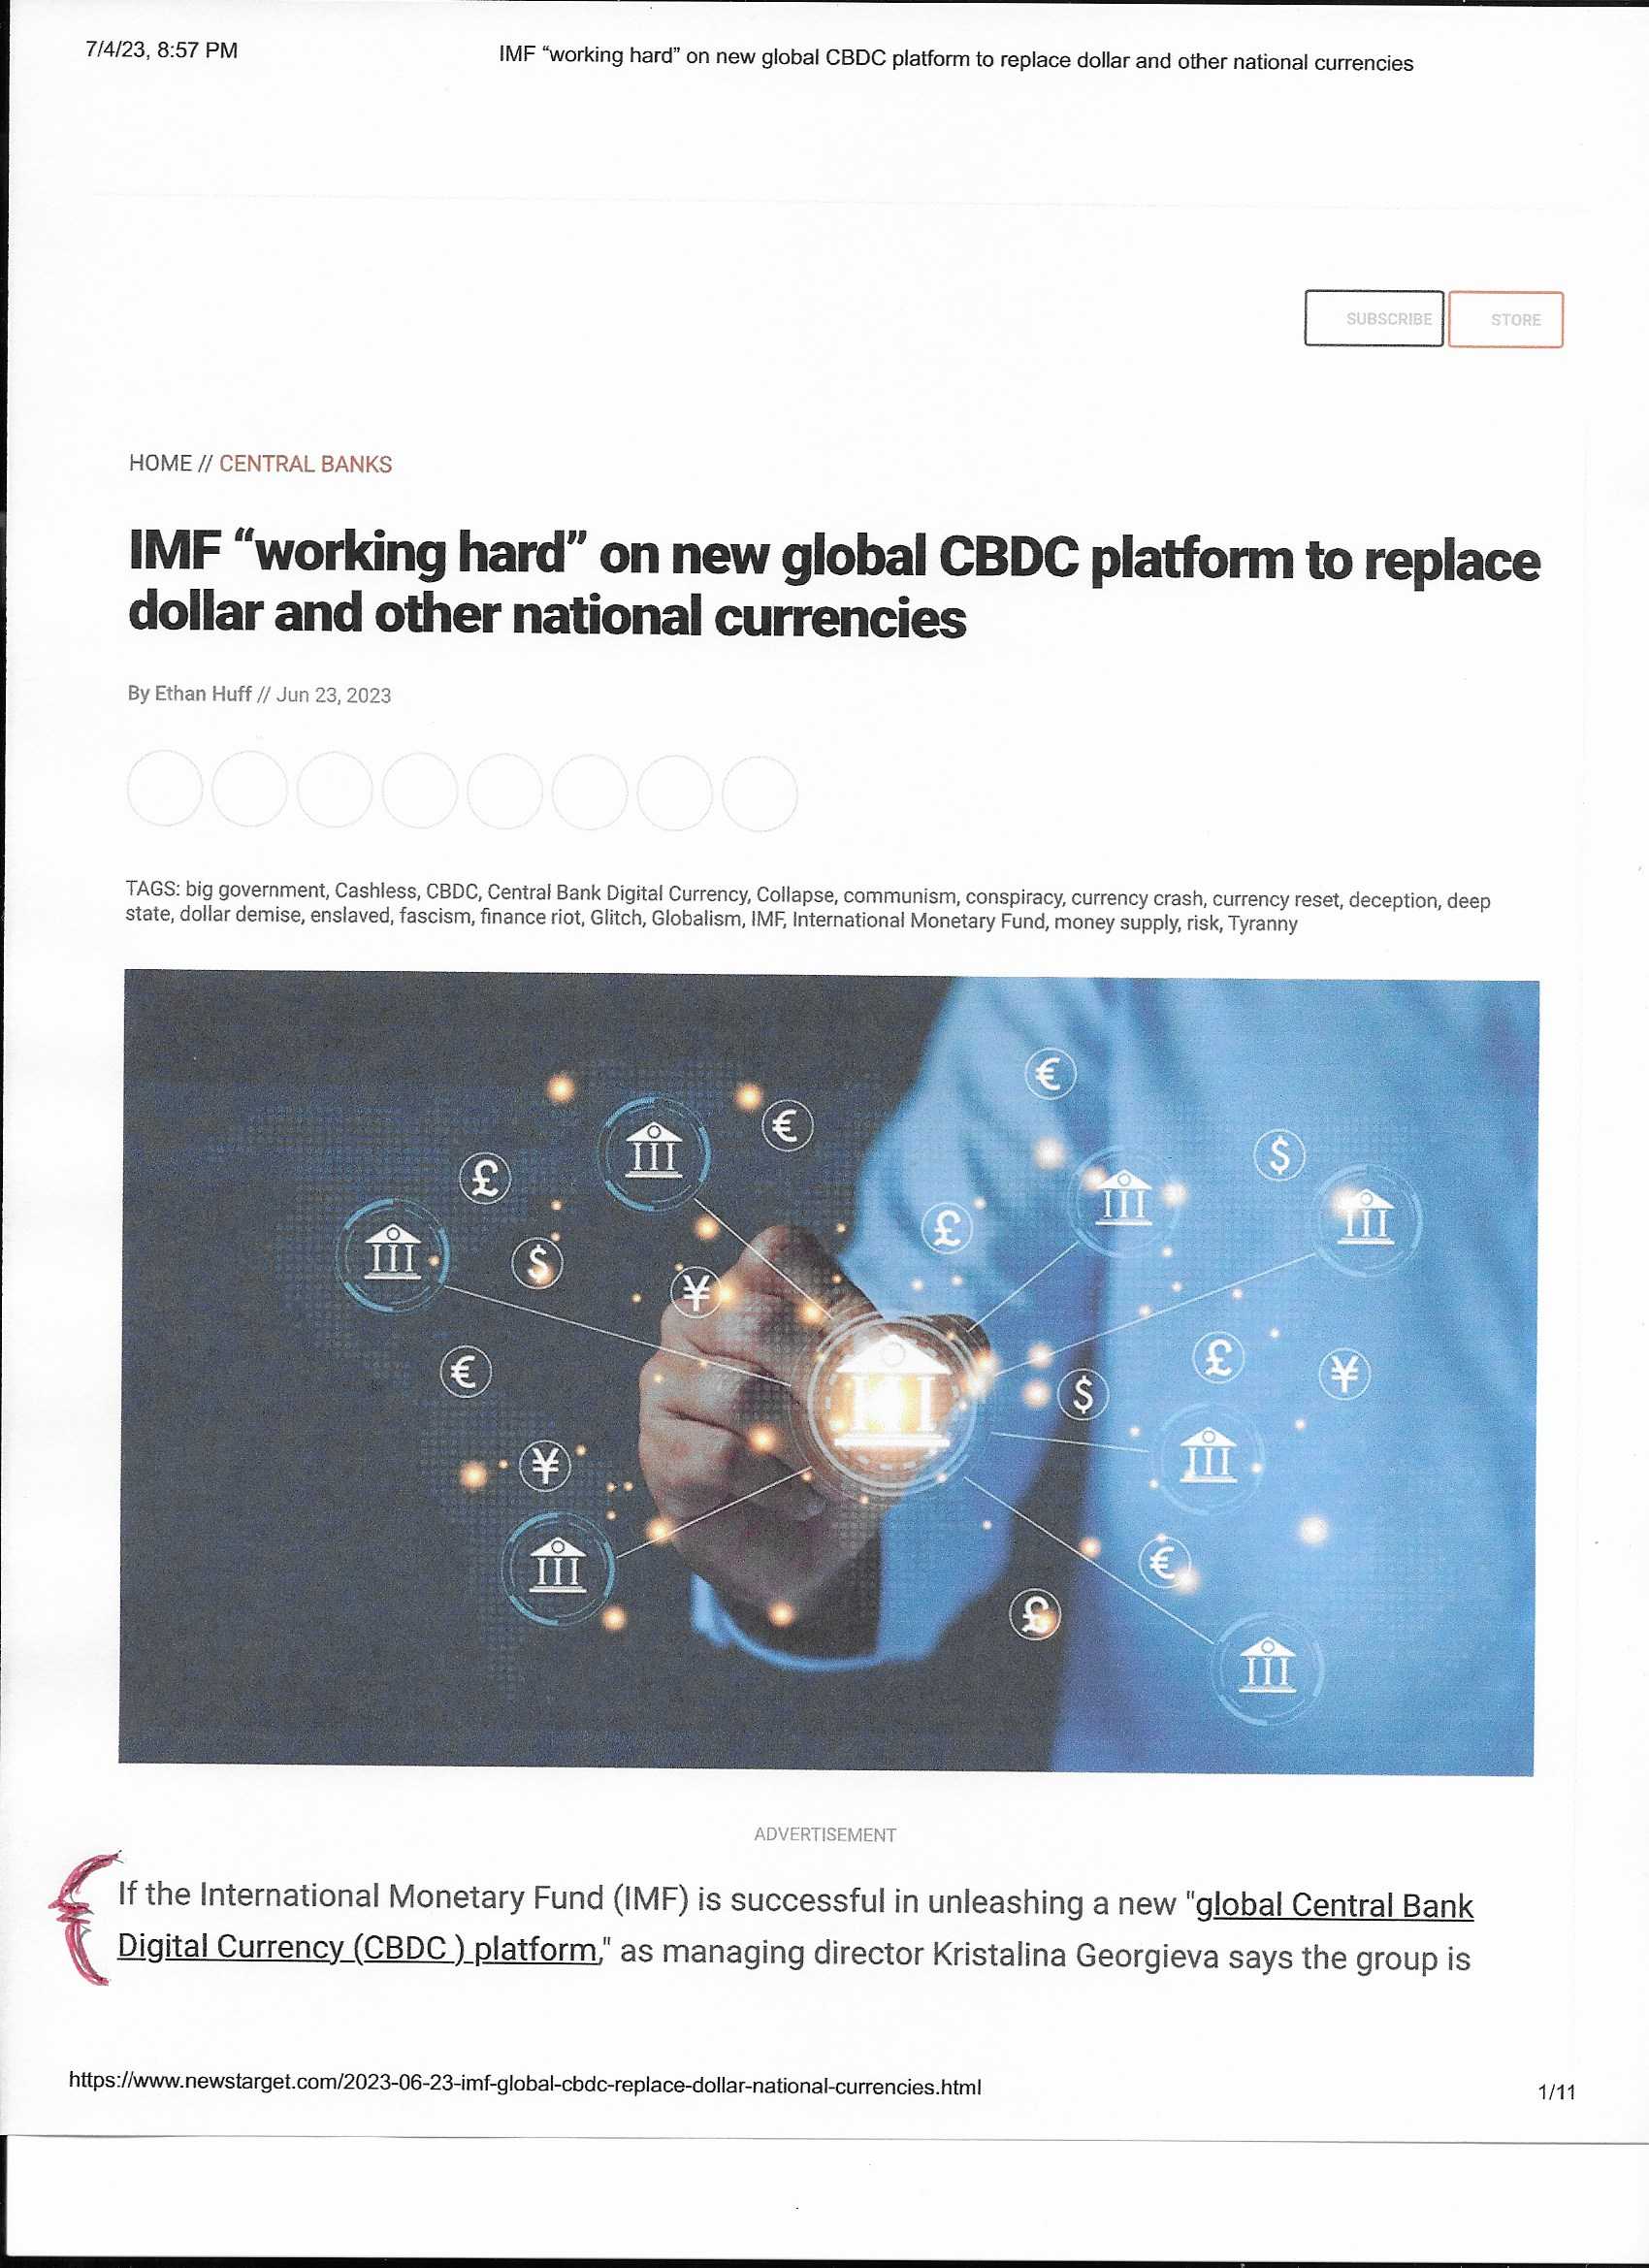 IMF “working hard” on new global CBDC platform to replace dollar and other national currencies  print out highlights page 1